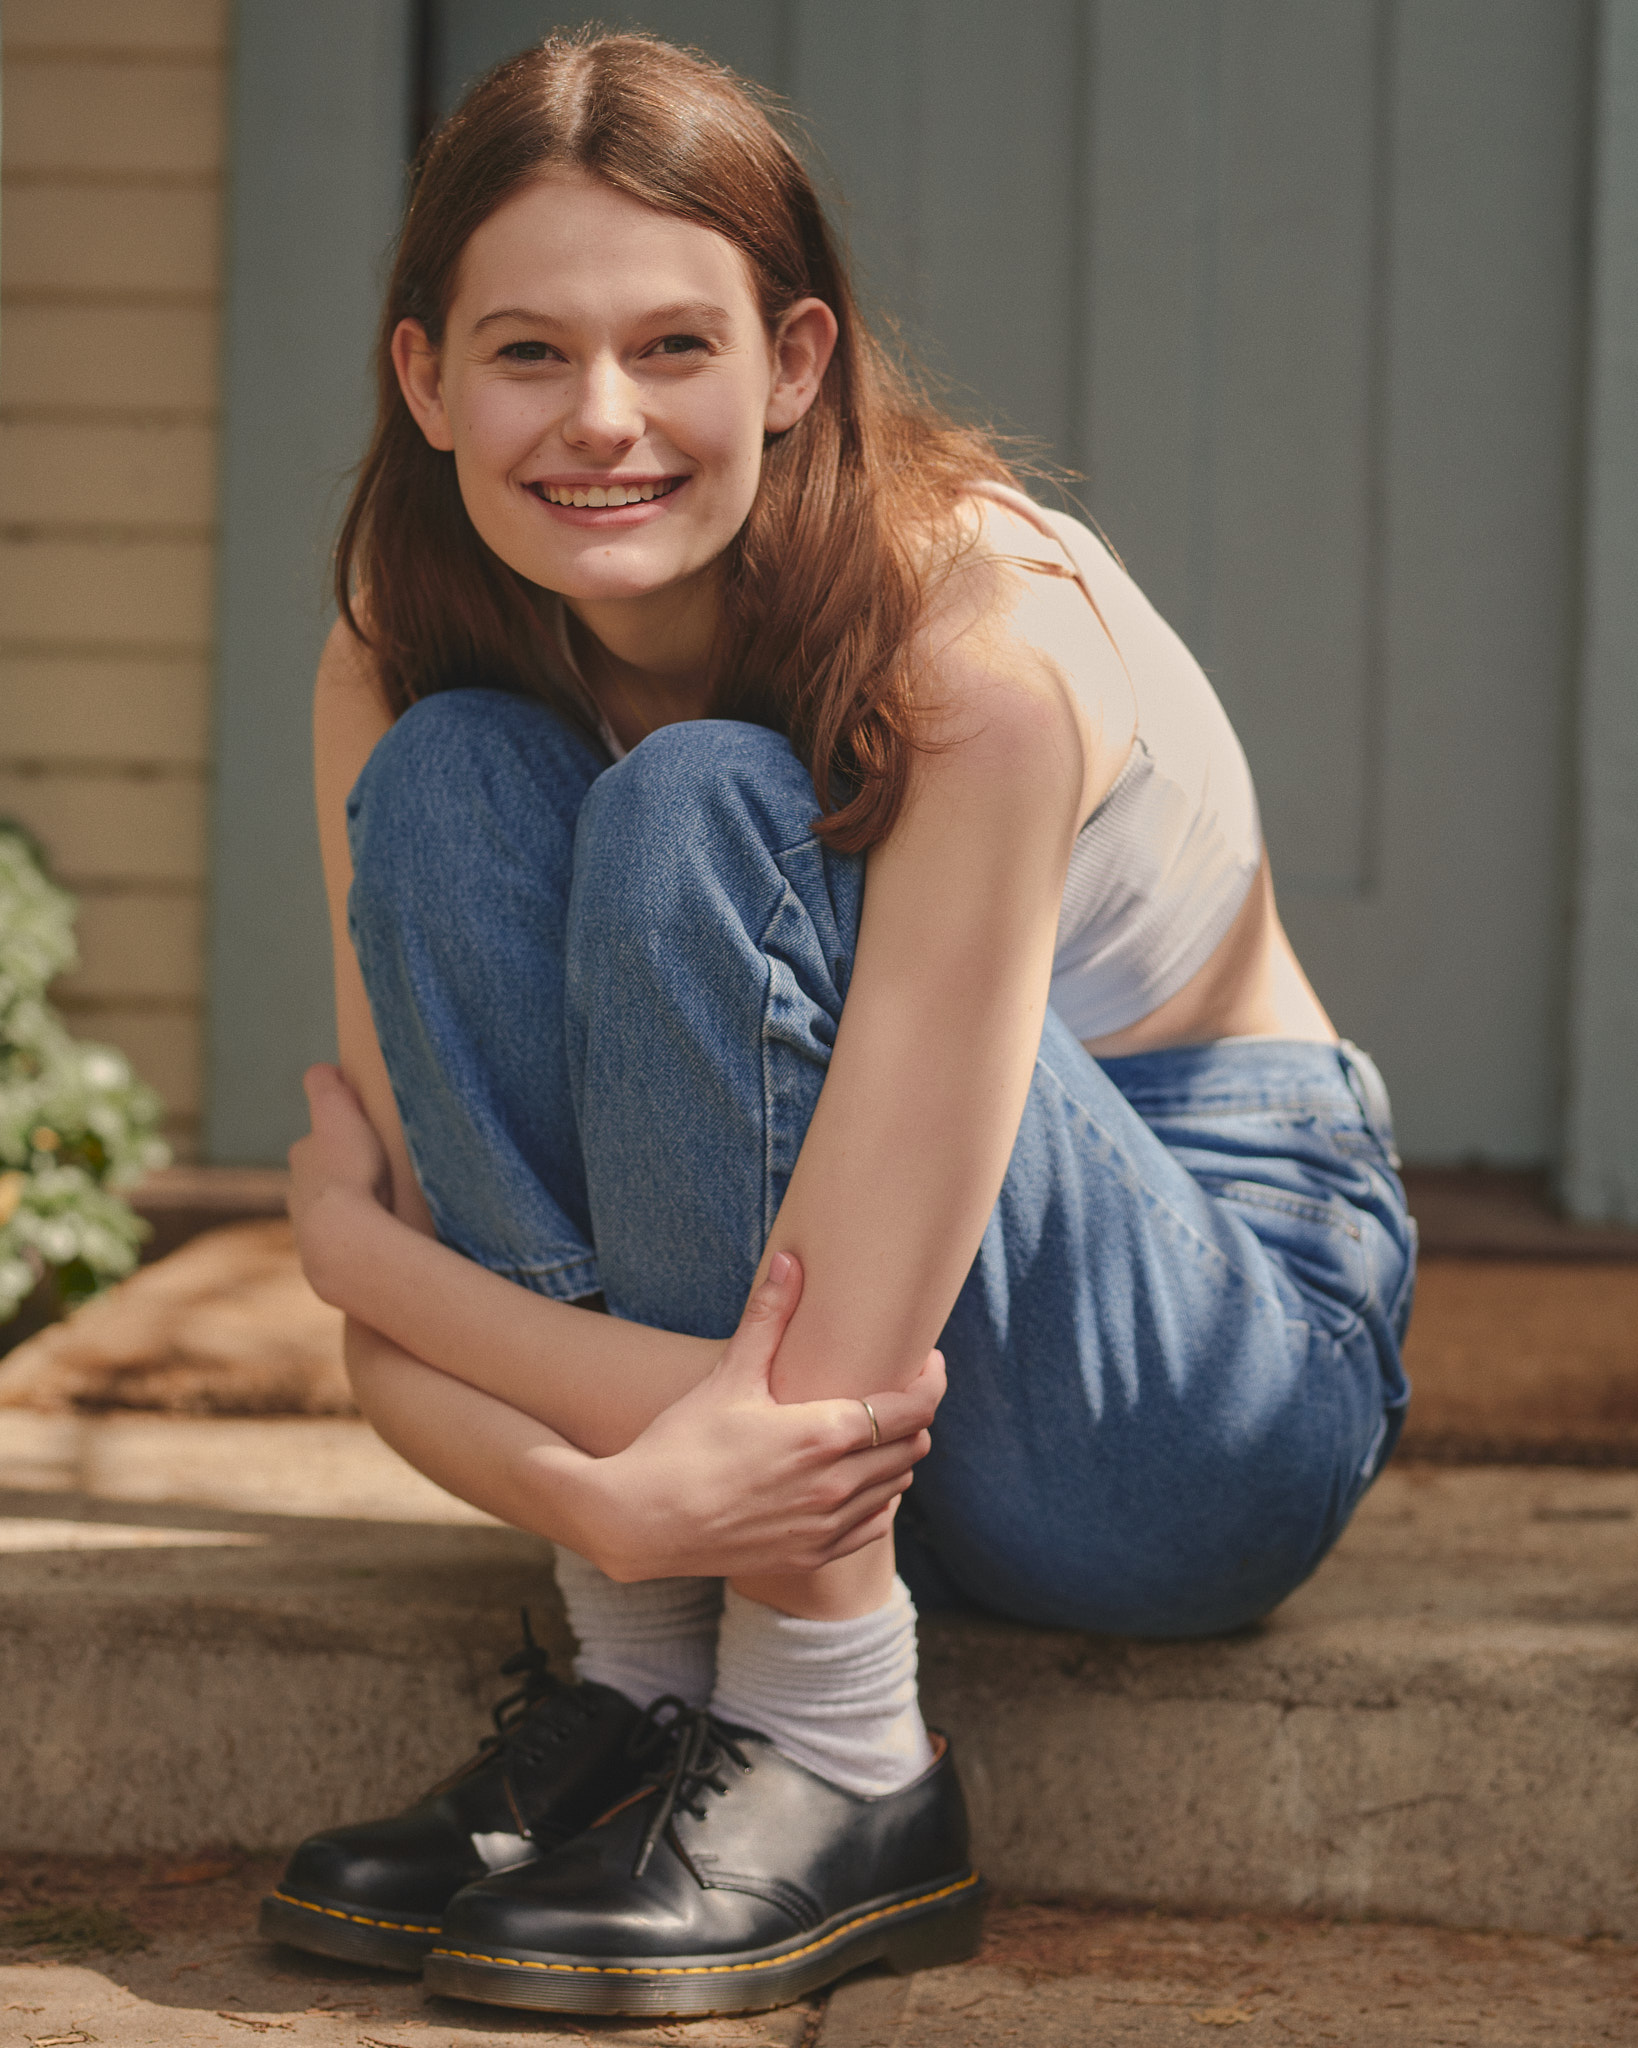 Wilhelmina Model Grace Bayer smiling while crouching in front of the door step